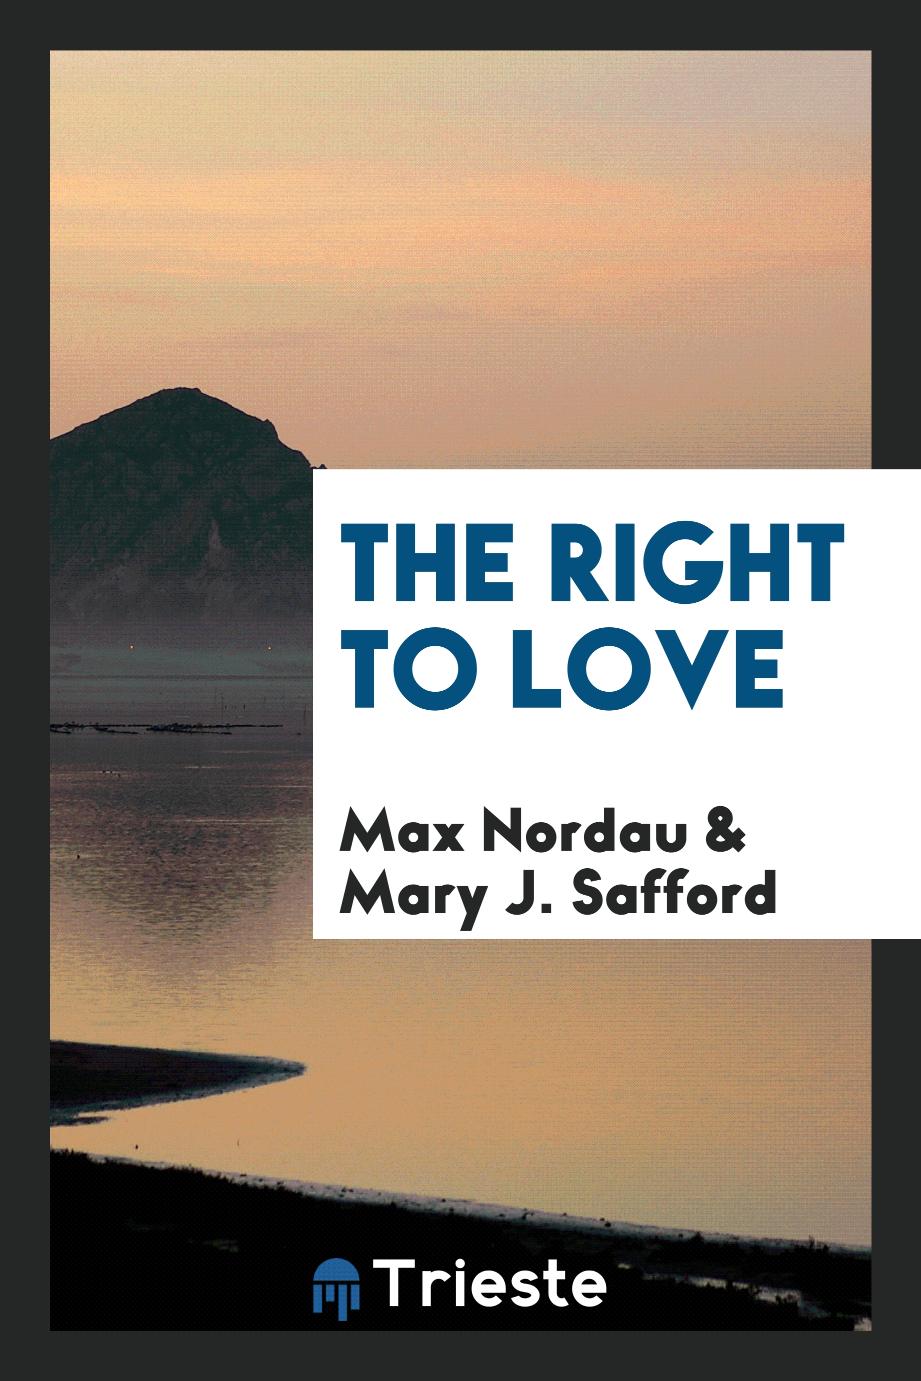 The right to love